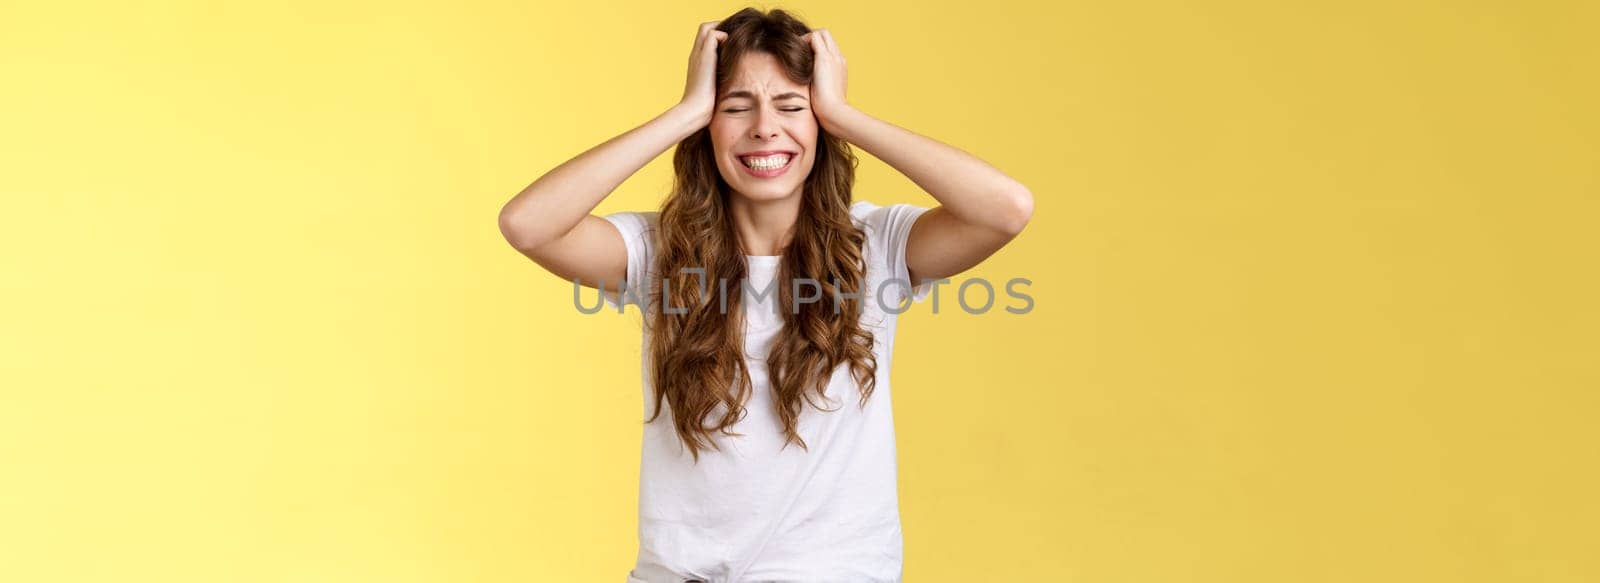 Girl feeling huge pain suffer heartbreaking break-up grab head panicking close eyes clench teeth anxiously troubled feel distress terrible situation stand yellow background hopeless grieving. Lifestyle.